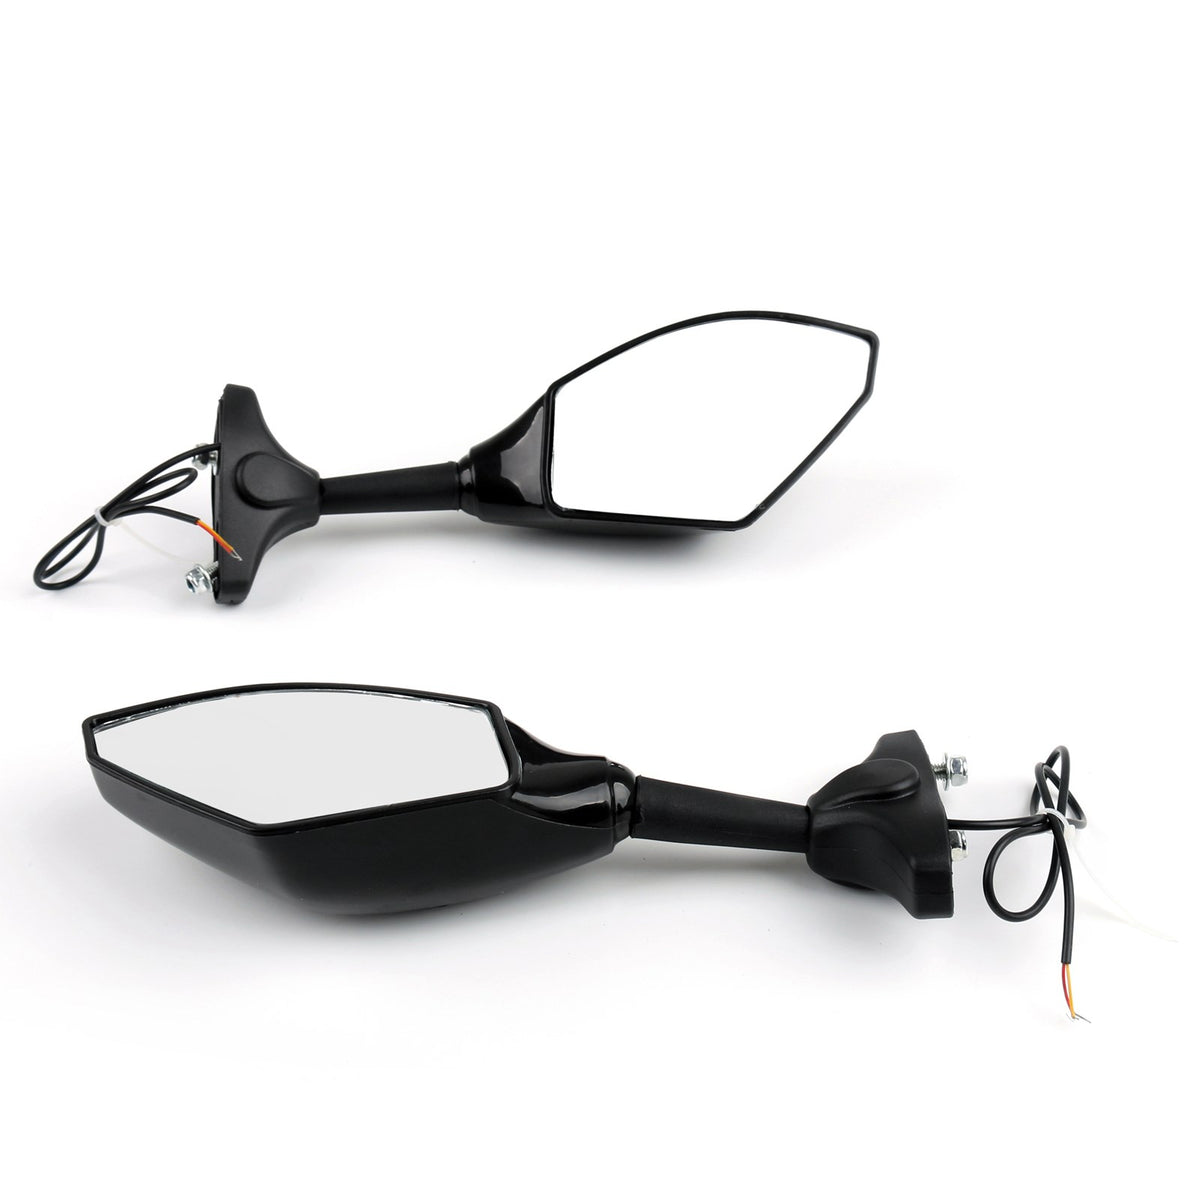 Pair Rear View Side Mirrors With LED Turn Signals Fit For Honda CBR600F4i 2001-2006 CBR600F4 1999-2000 CBR600F 1987-1990 CBR250R  2011-2013 Generic